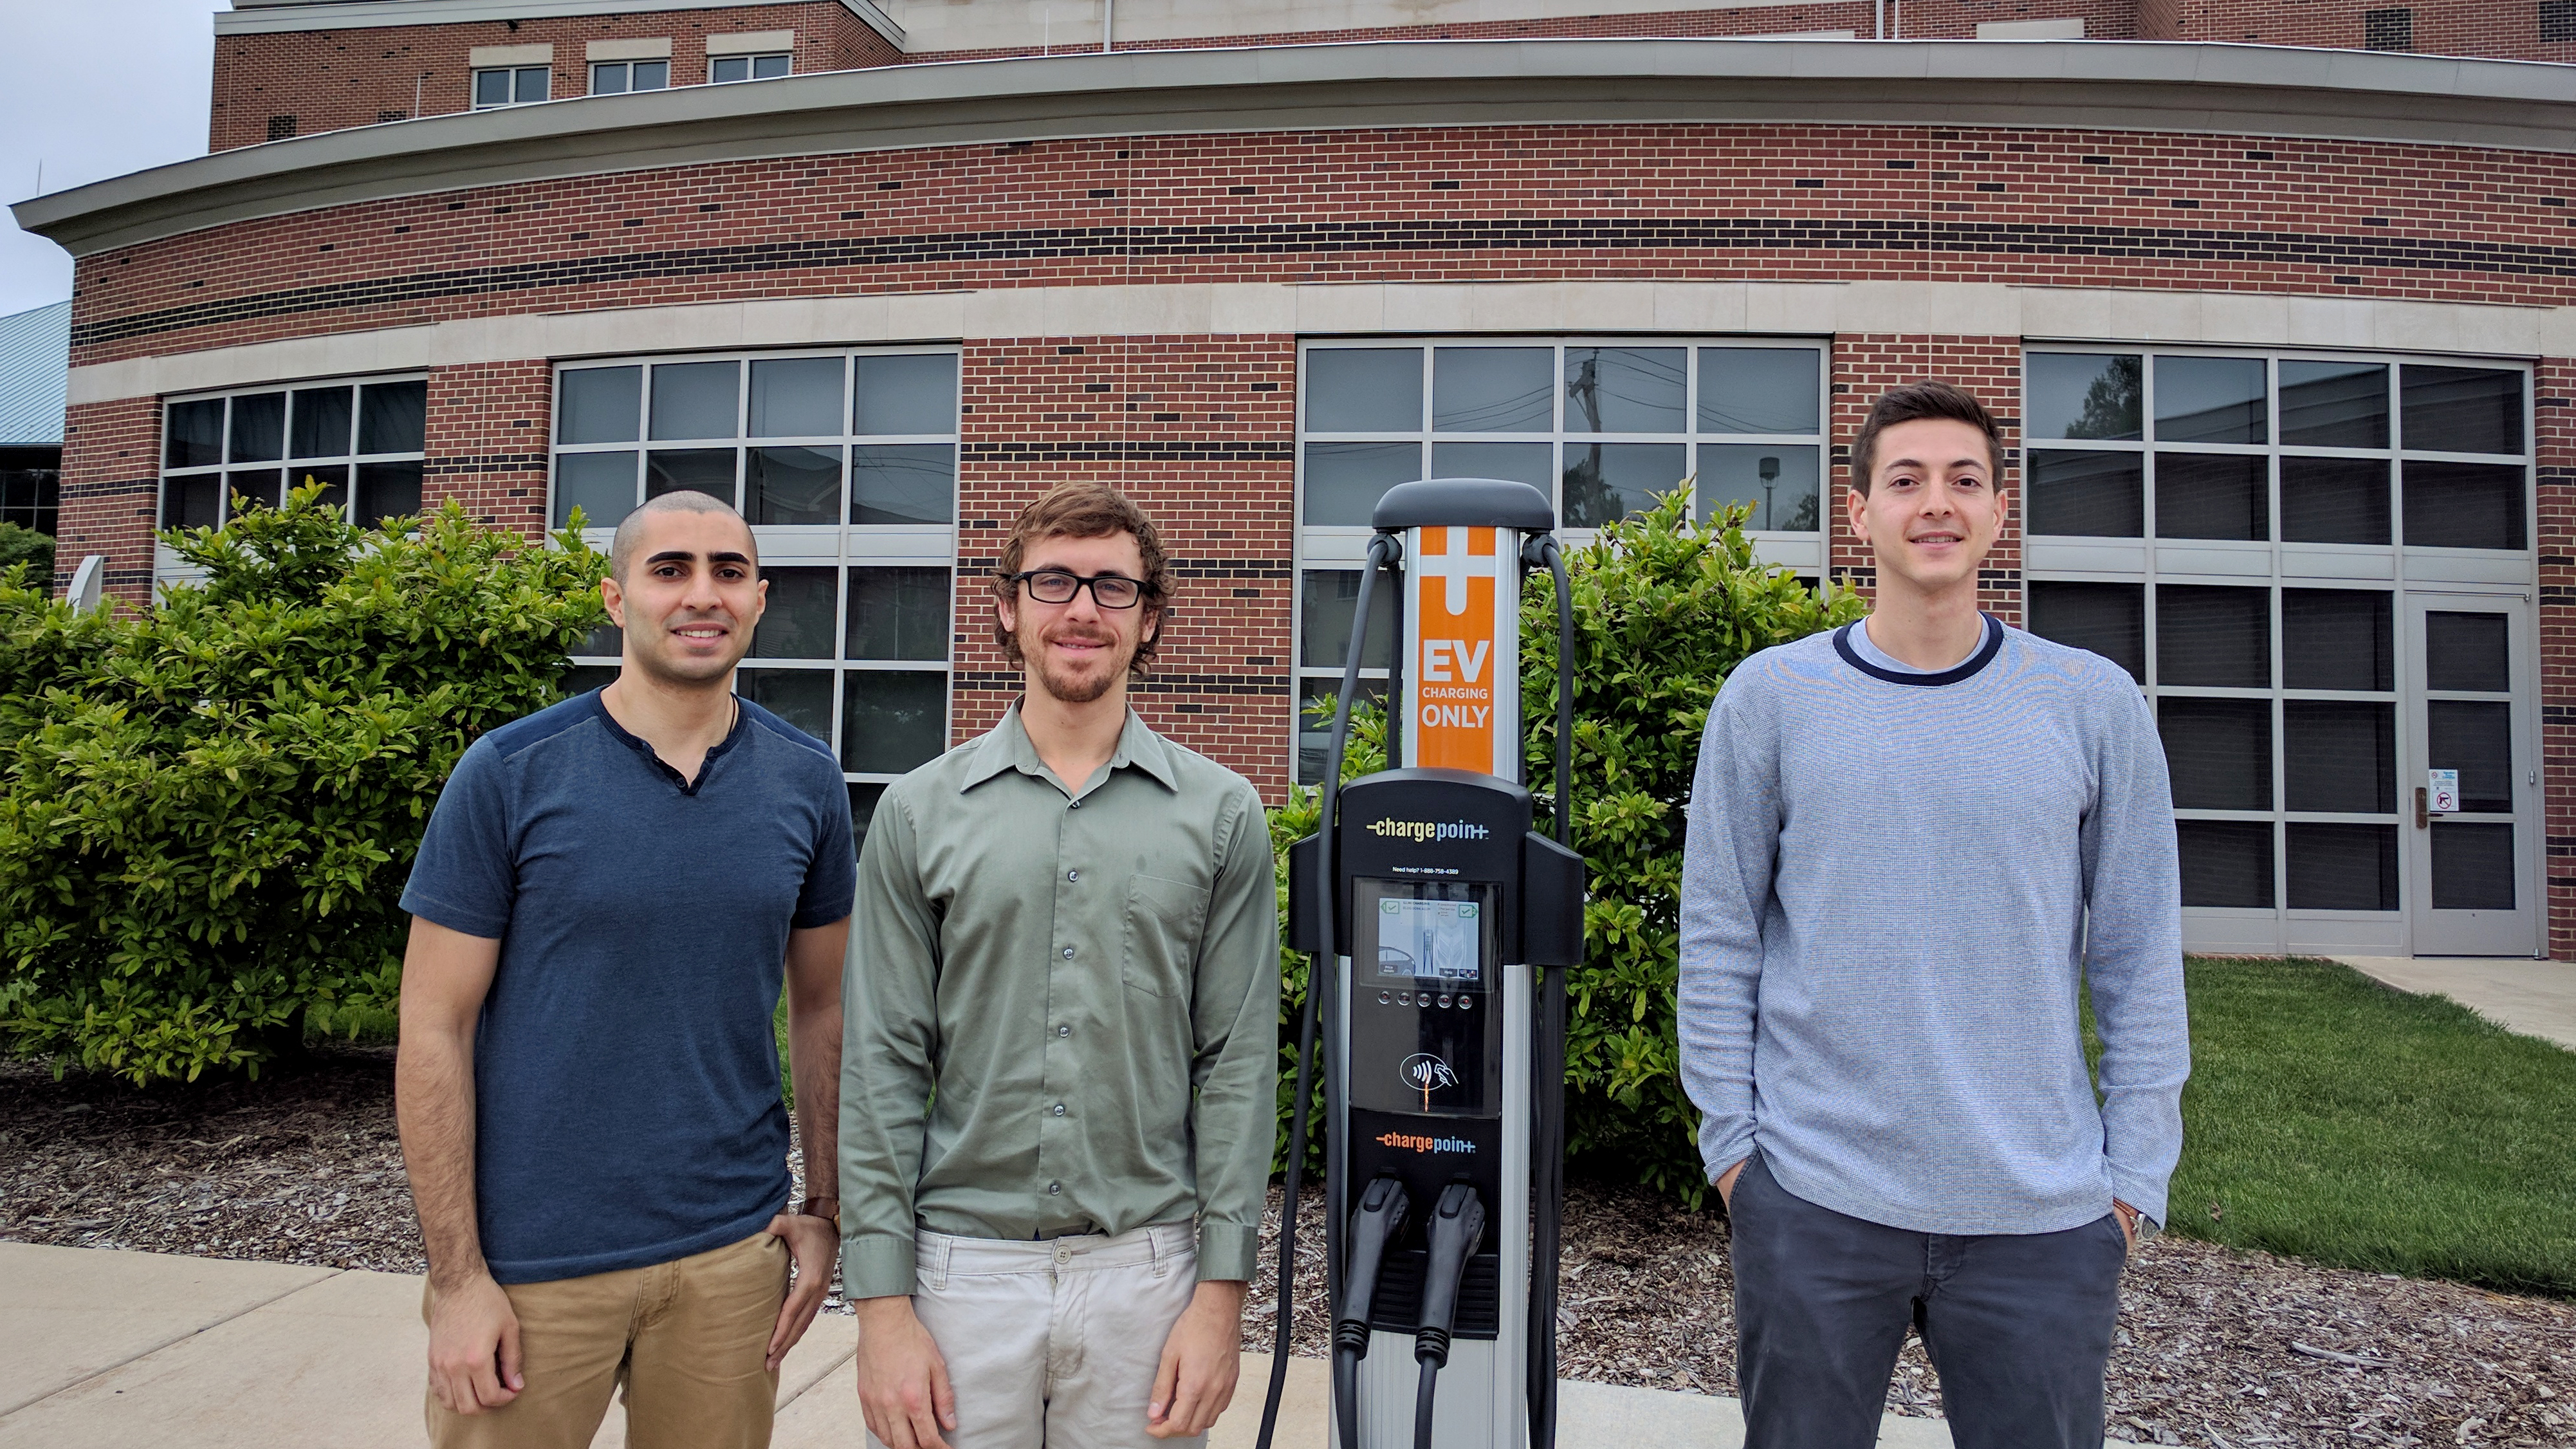 Energy Systems team proposes additional charging stations to increase electric vehicle usage on campus